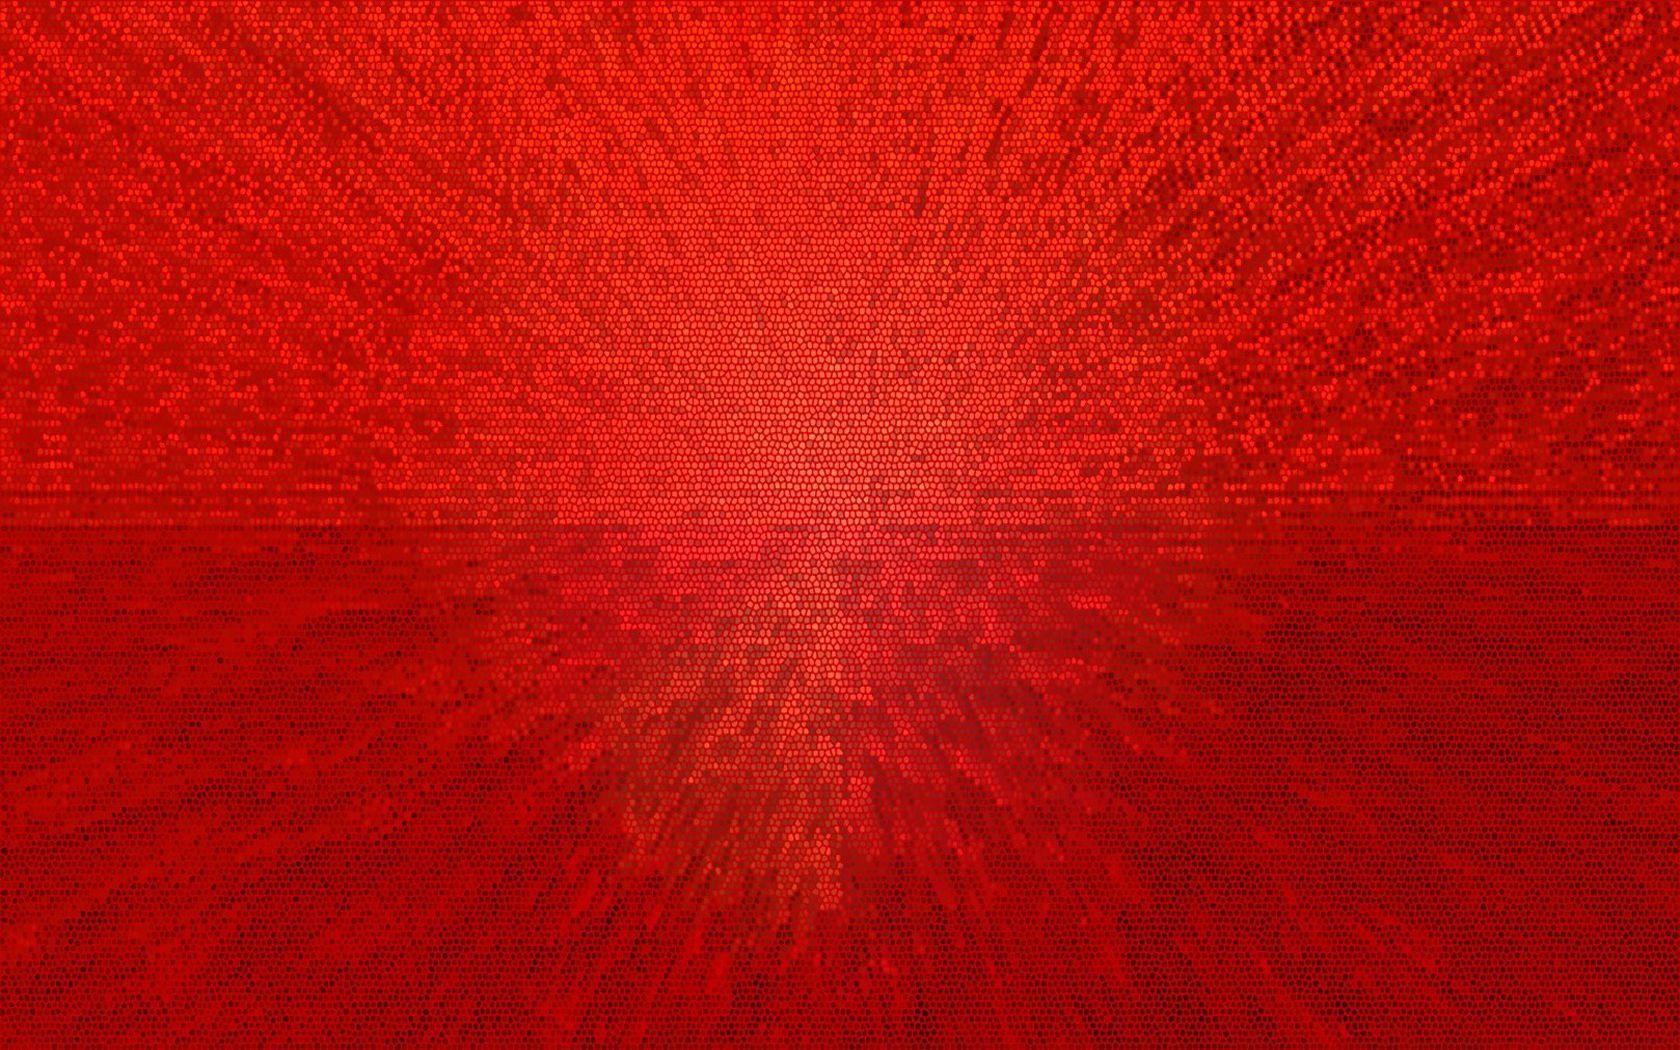 Red Awesome Background